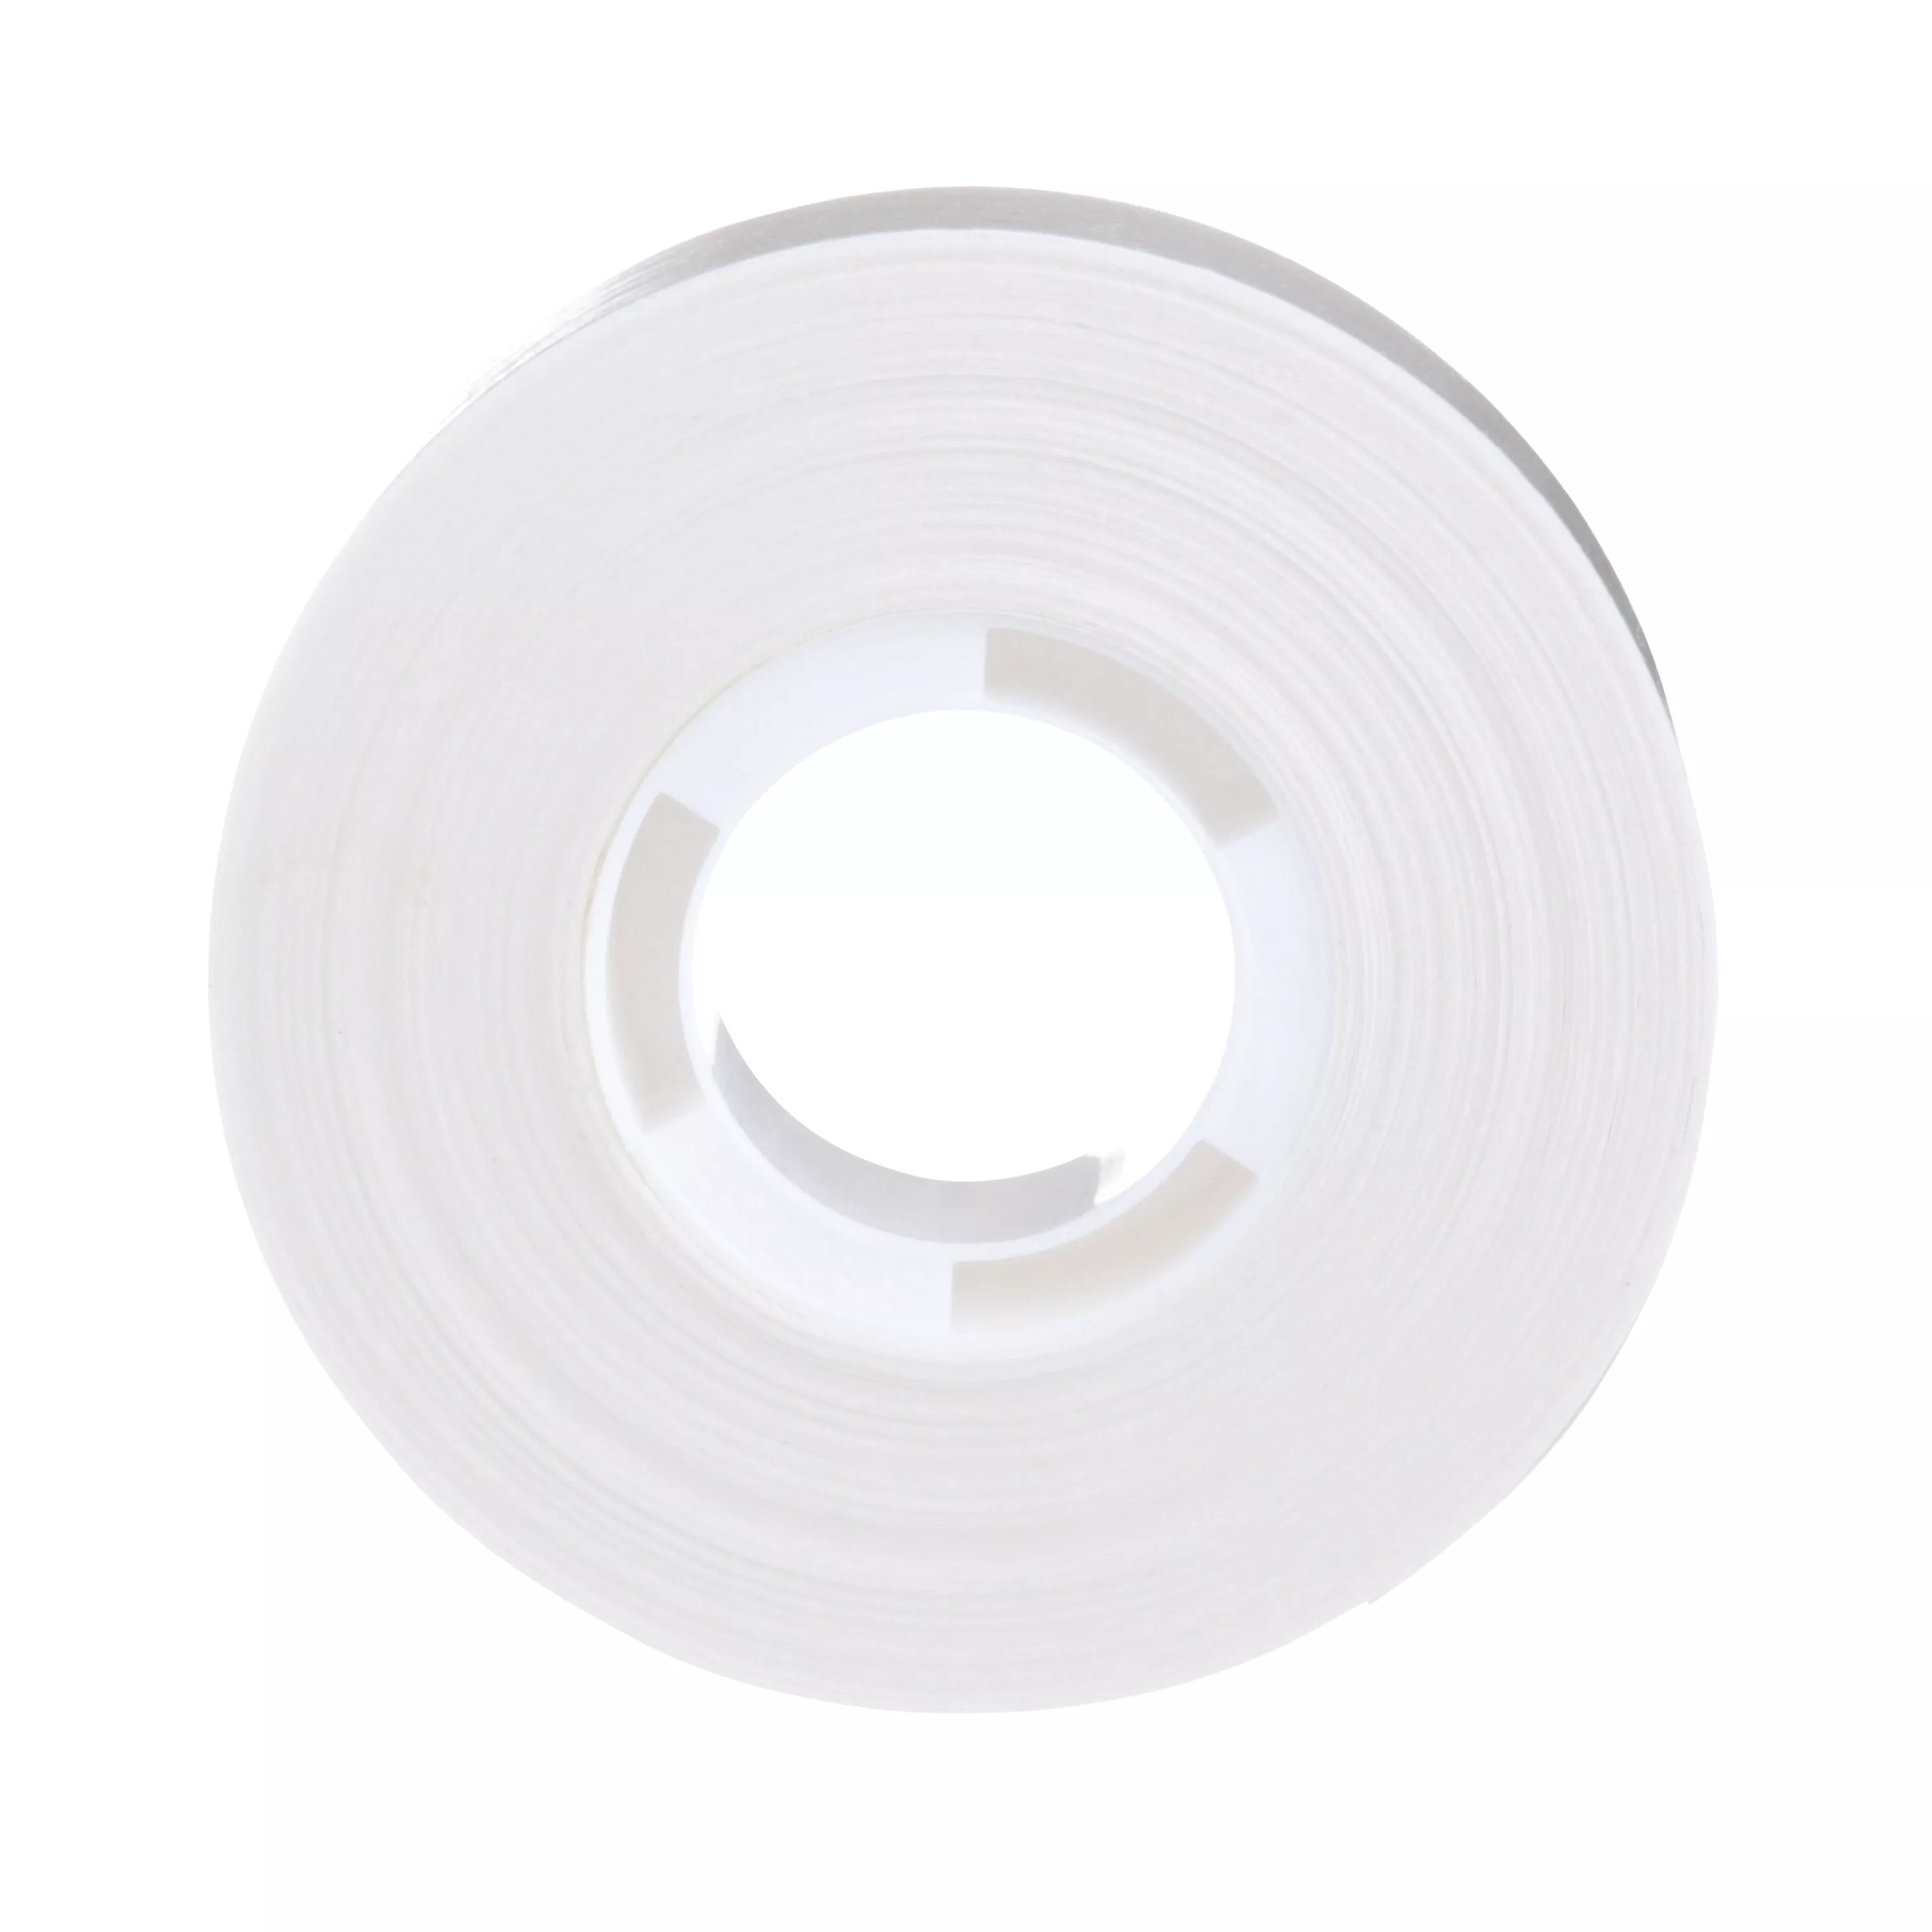 Product Number 928 | Scotch® ATG Repositionable Double Coated Tissue Tape 928